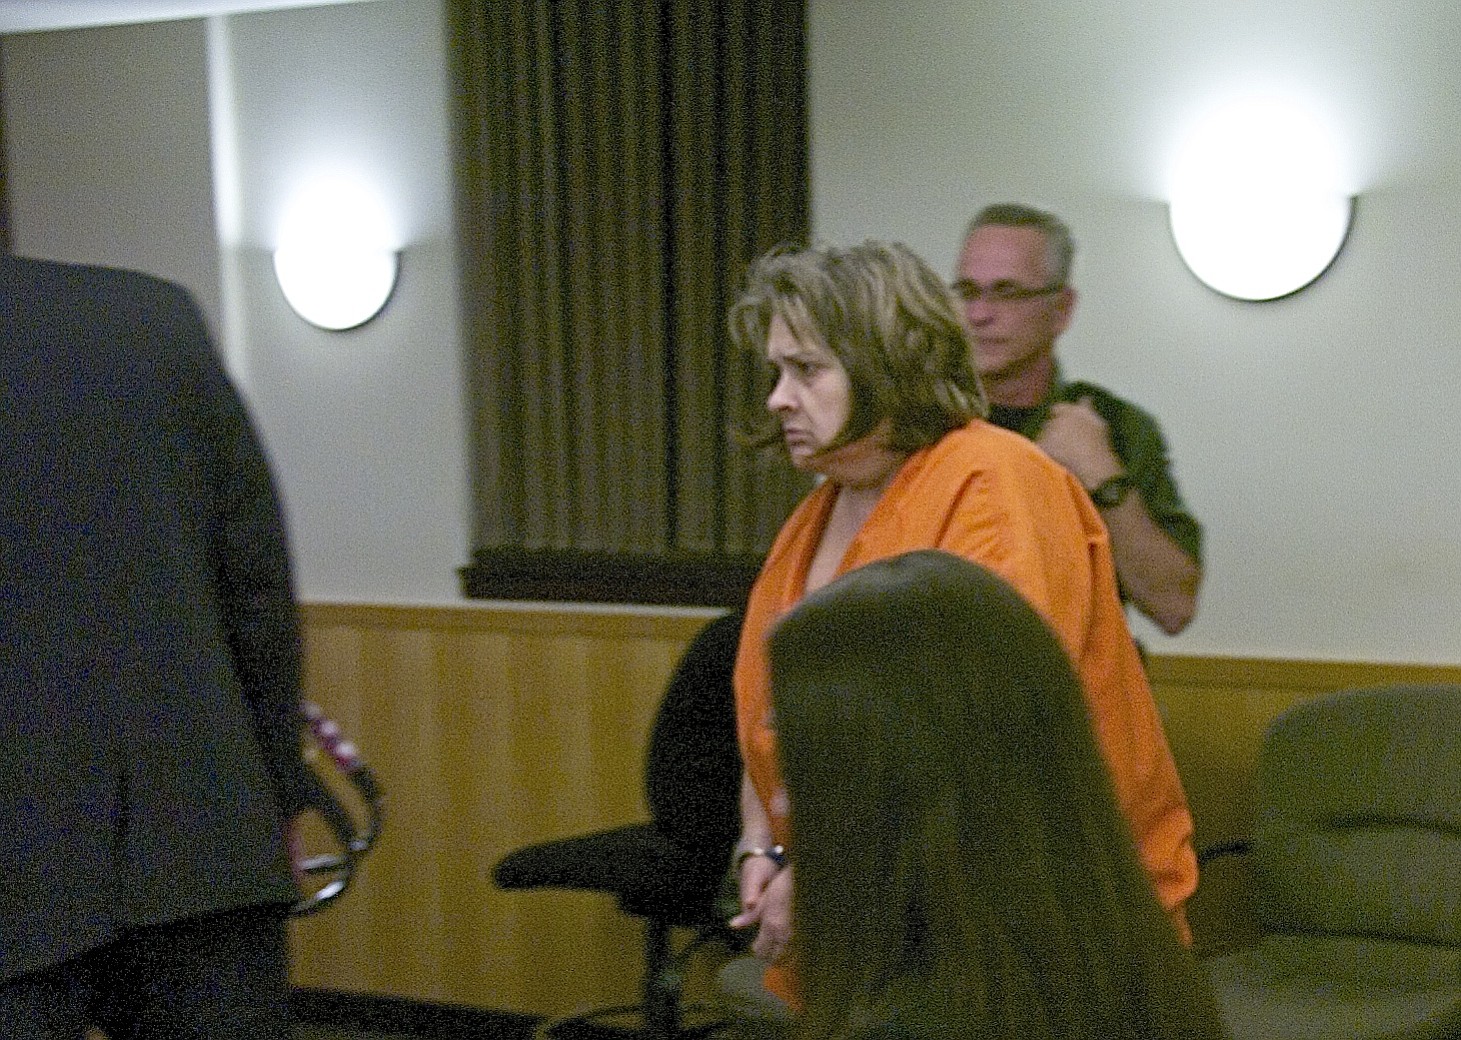 April Blue Colton appears in court Wednesday on charges of manslaughter in the death of her 6-month-old grandson.